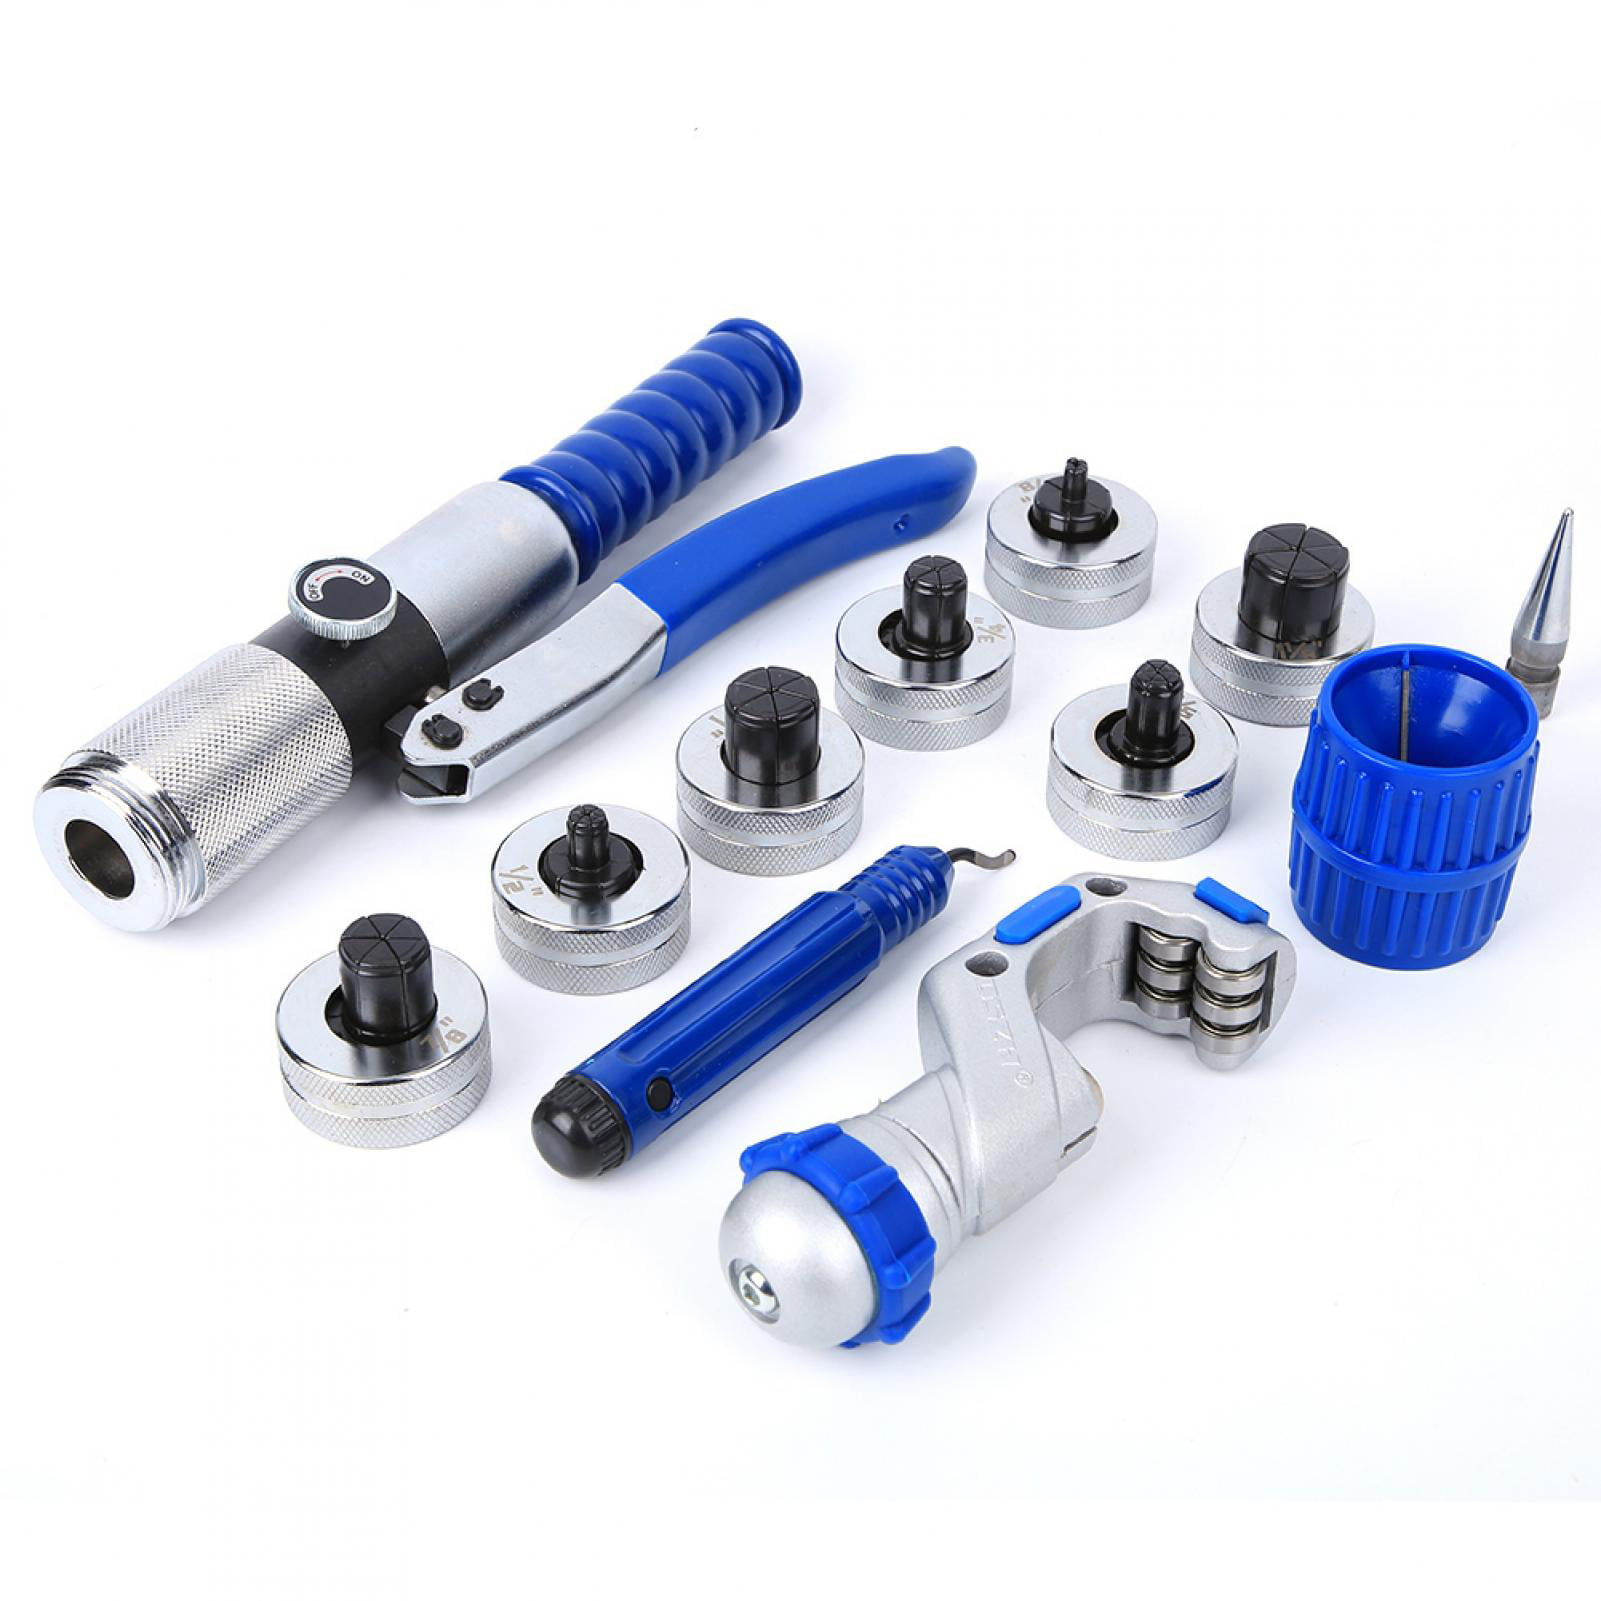 10-28mm Pipe Flaring Tool Hydraulic Tube Expander 7PCs Expander Heads Tubing Expanding Tool Portable for Tubing and Piping with Case